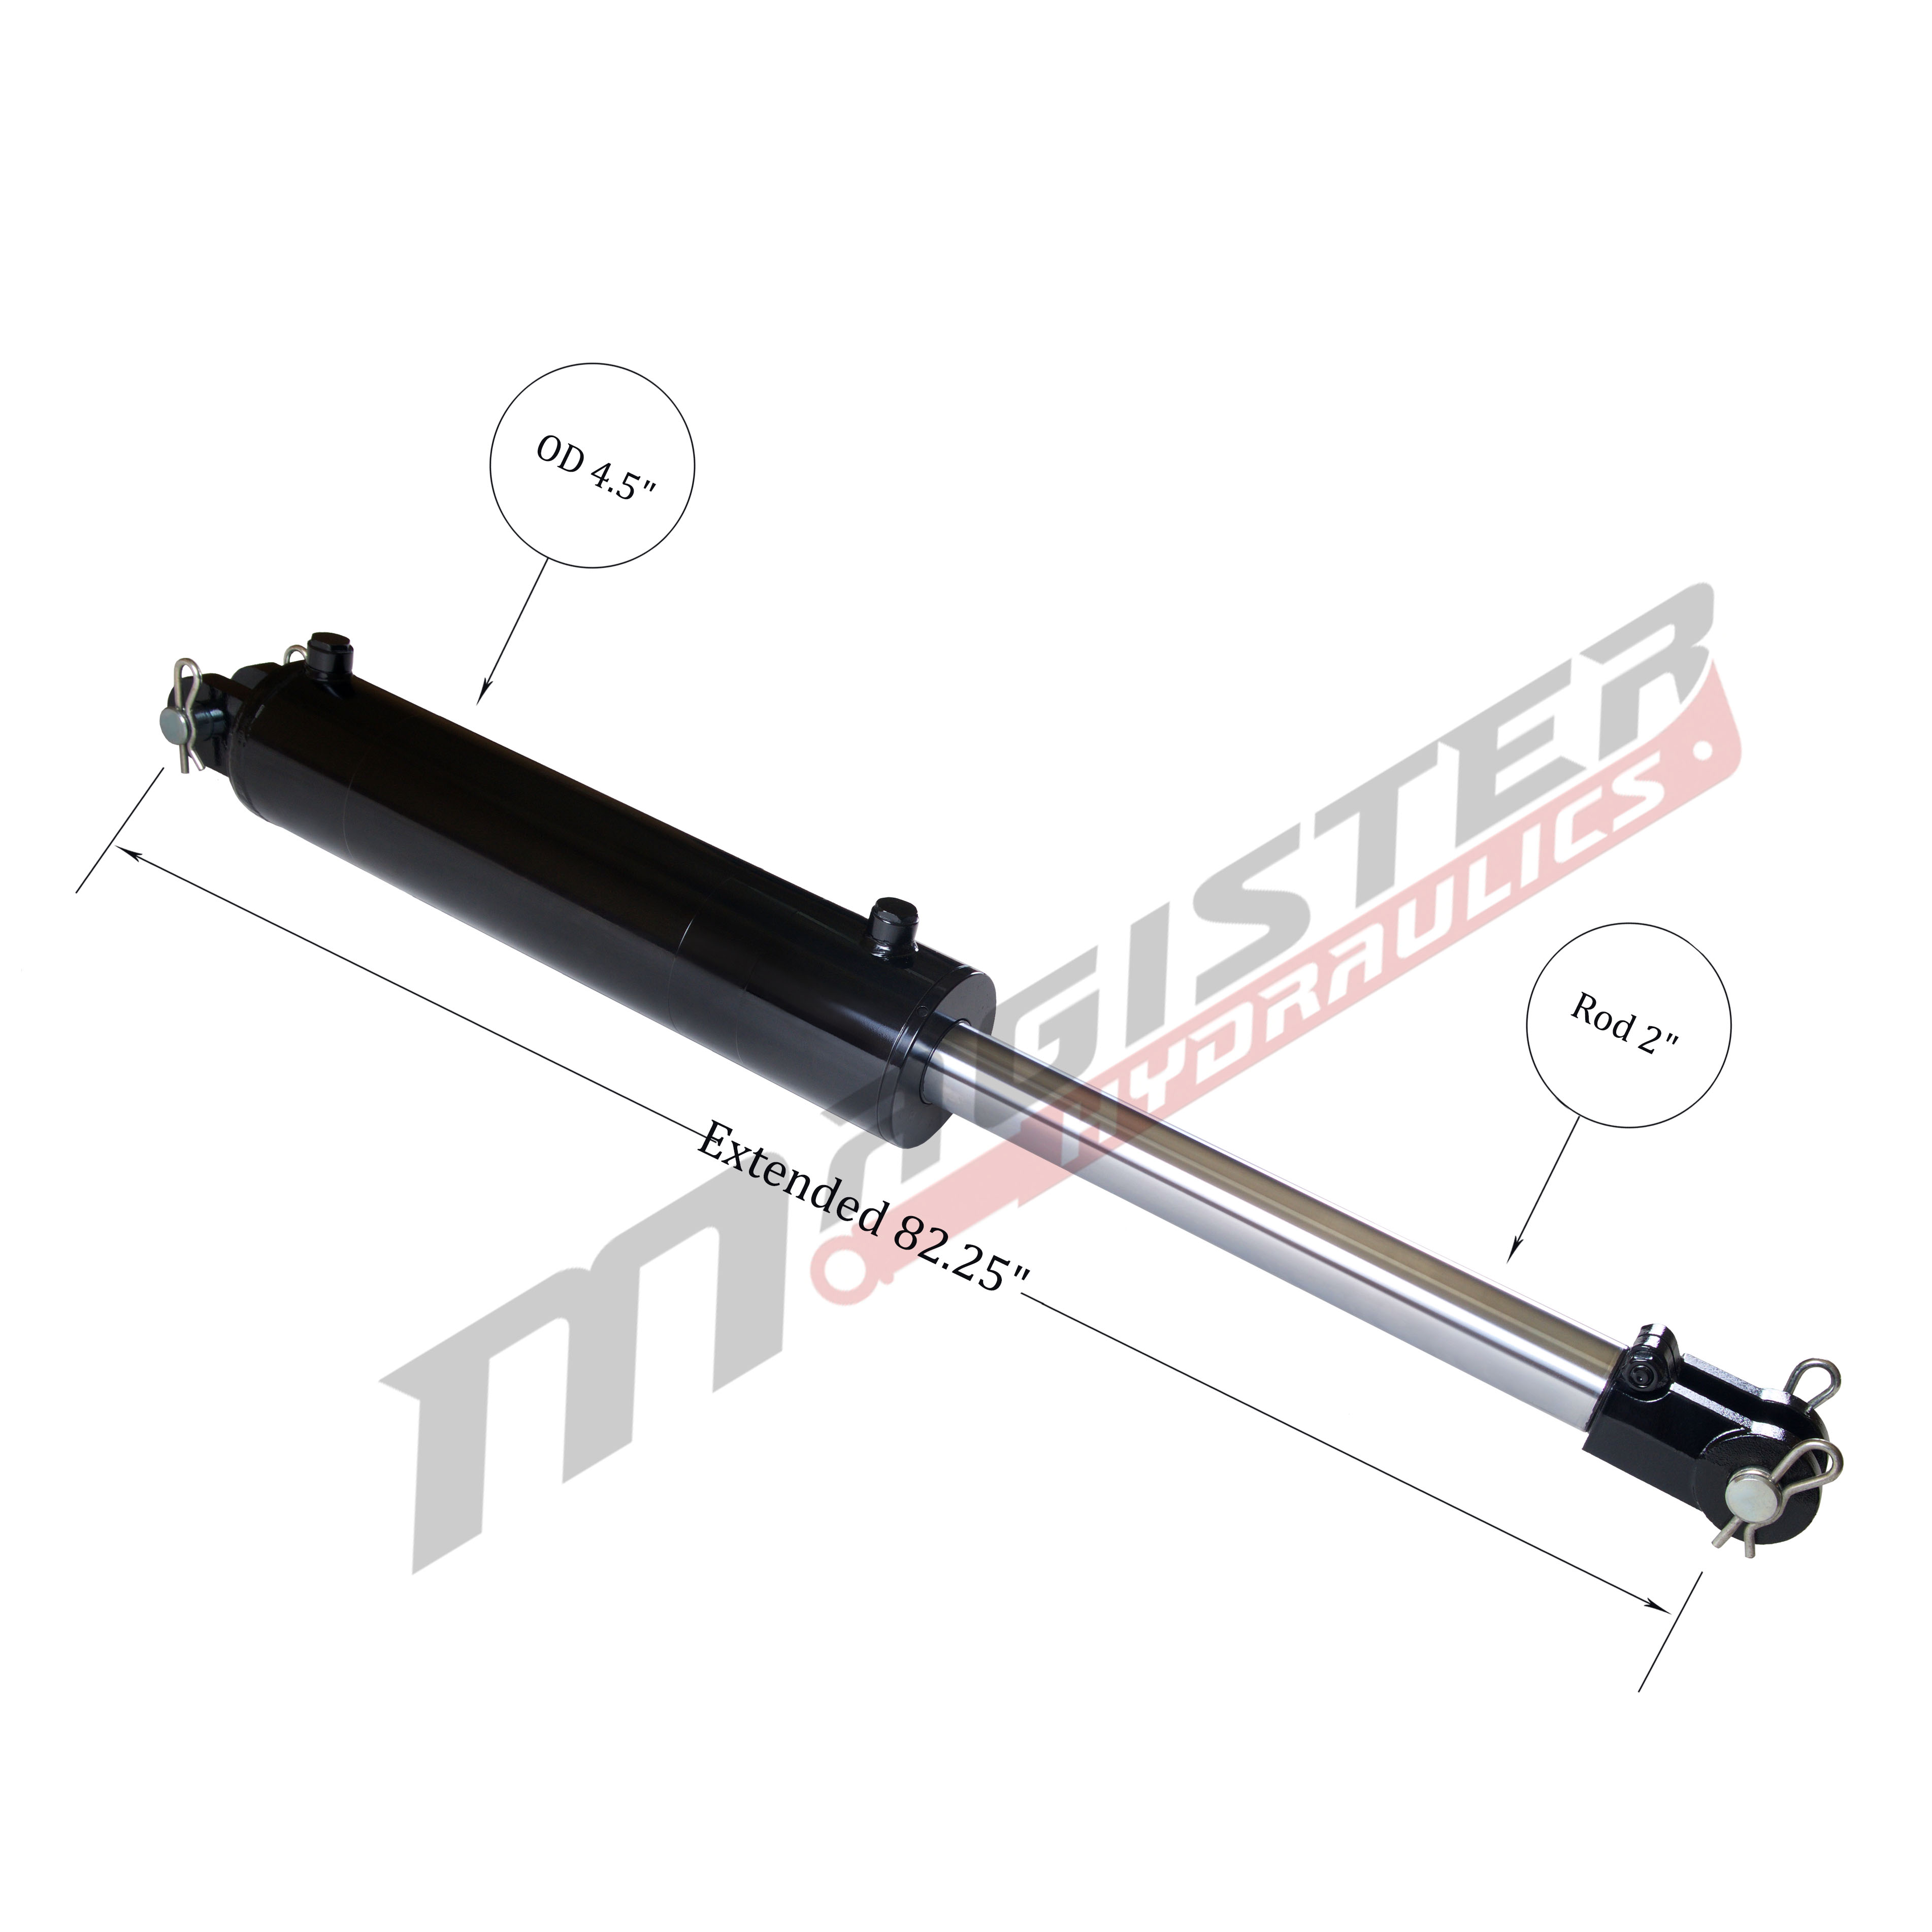 4 bore x 36 stroke hydraulic cylinder, welded clevis double acting cylinder | Magister Hydraulics